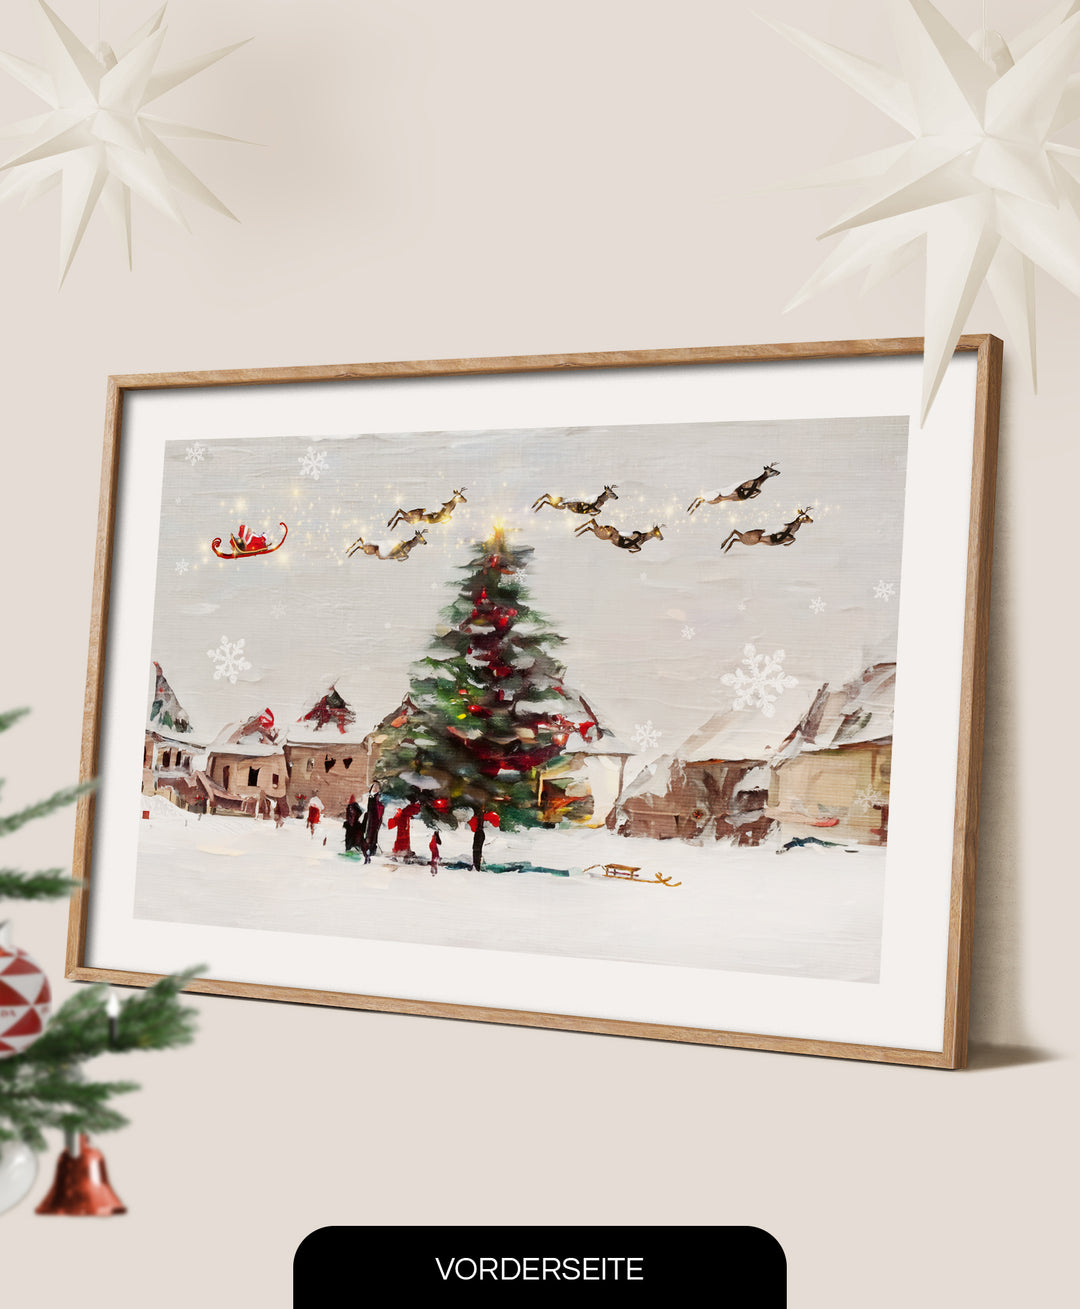 DUOVision Small Town X-Mas Vibes - 2in1 Poster